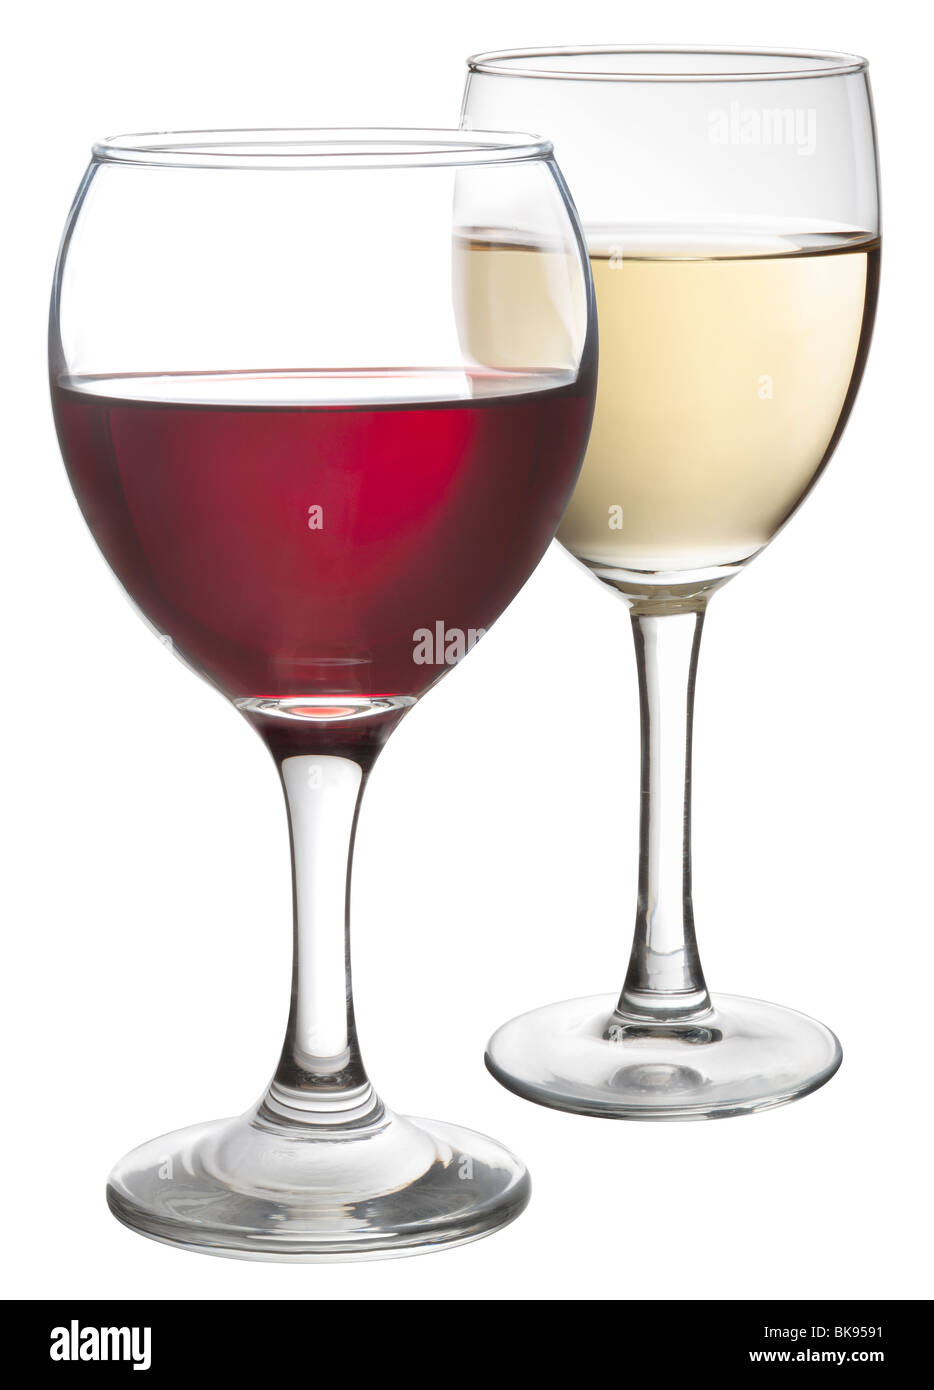 Glasses of Red and White Wine Stock Photo